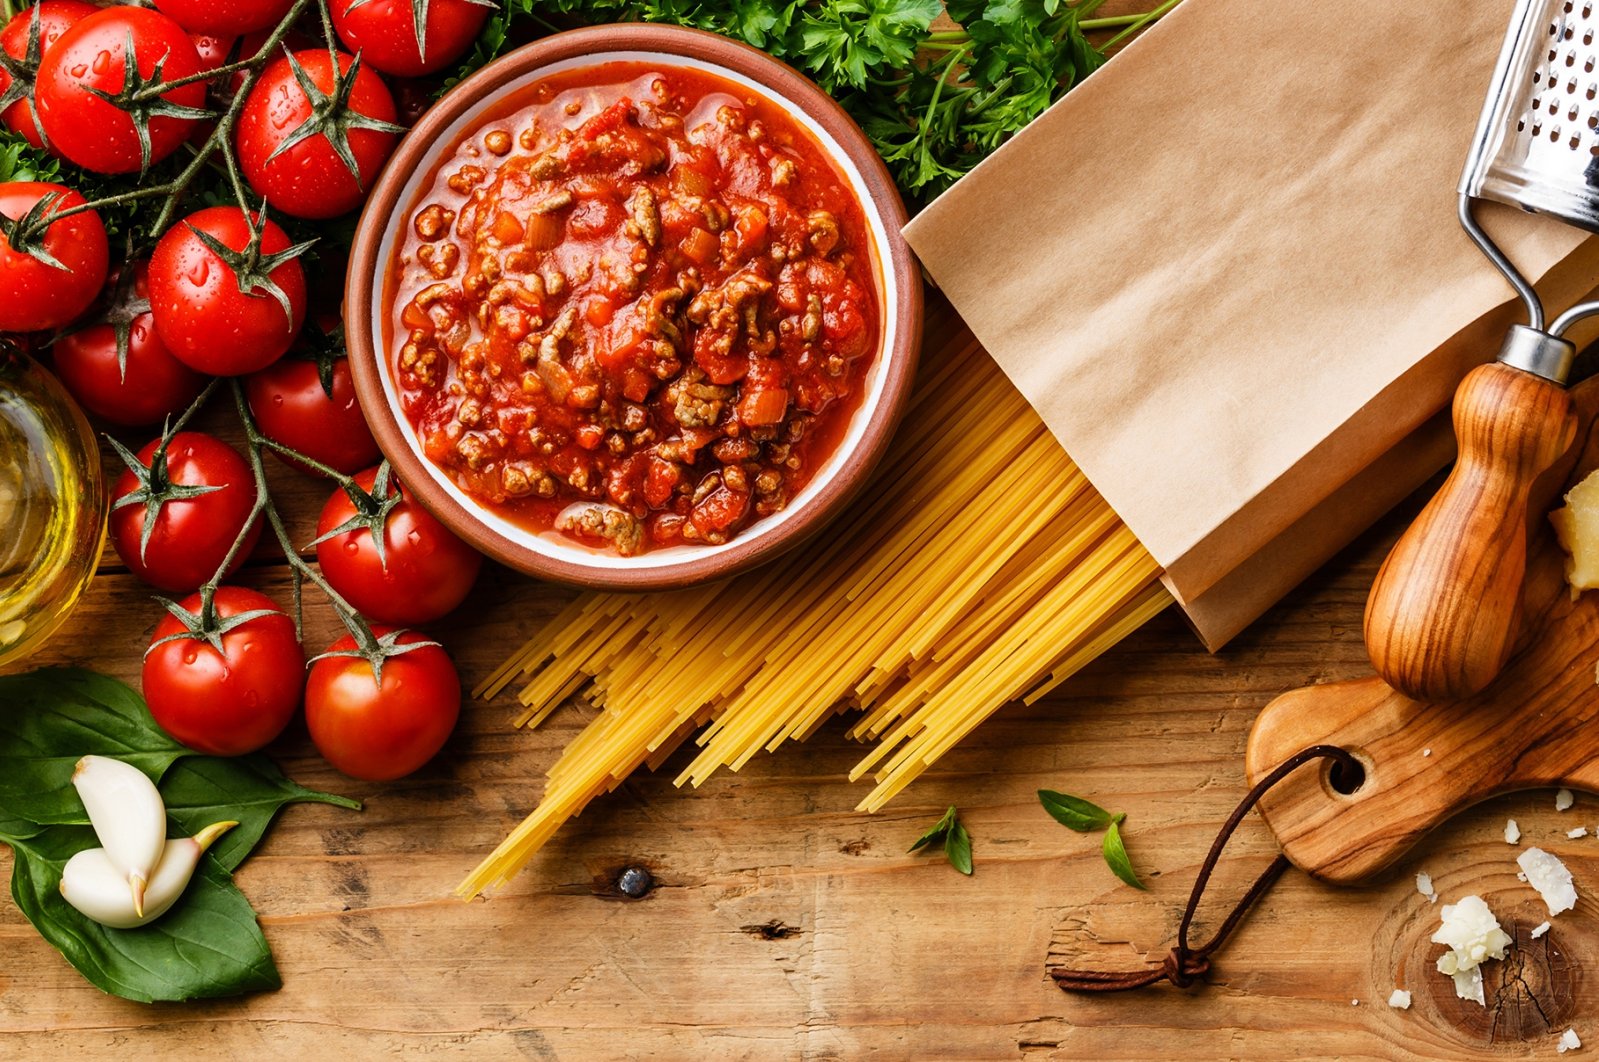 With a bit of garlic, tomato and parmesan, you can turn your spaghetti into a truly delicious dish. (Shutterstock Photo)